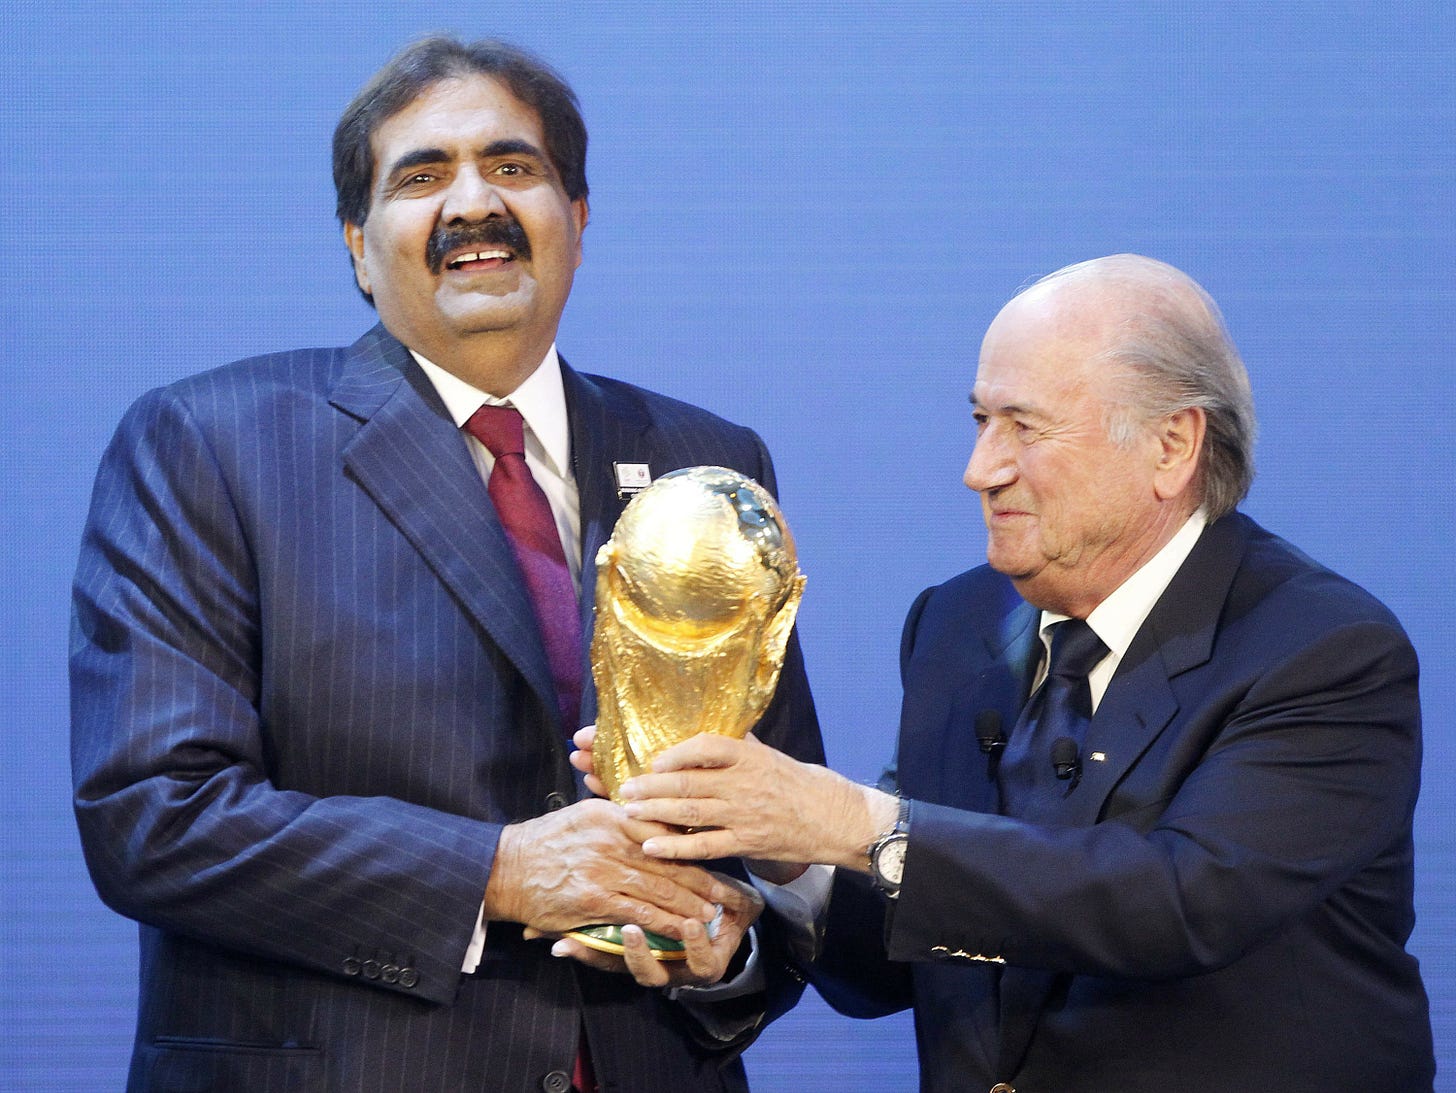 FIFA: No improper activity by Qatar but conduct questioned | AP News